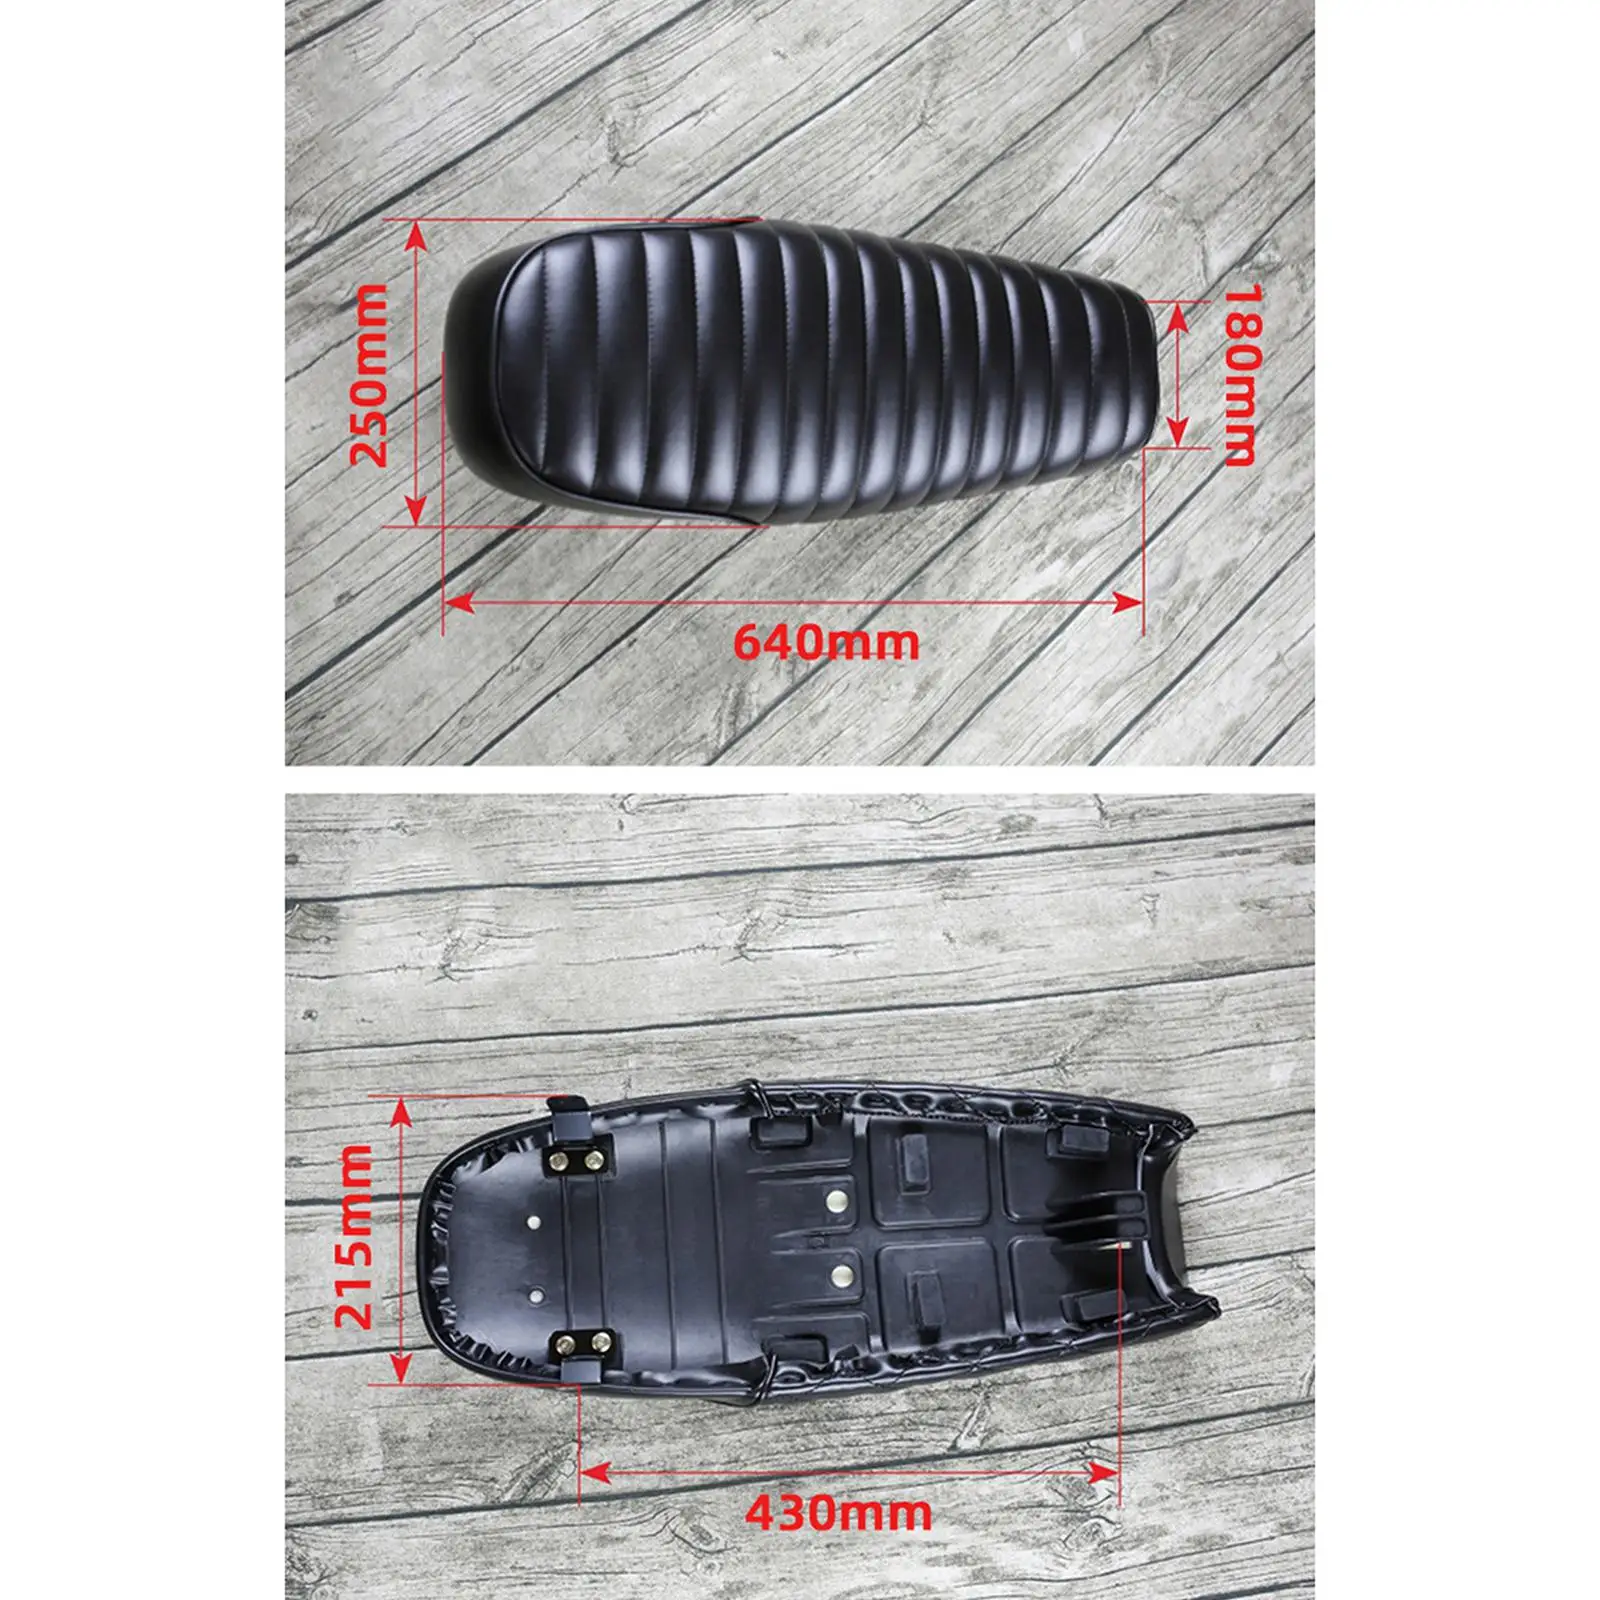 Motorcycle PU Durable Fast Drying Universal Saddle Replace Classic Shock Absorbing Comfort Saddle Seat Soft for Cafe Racer